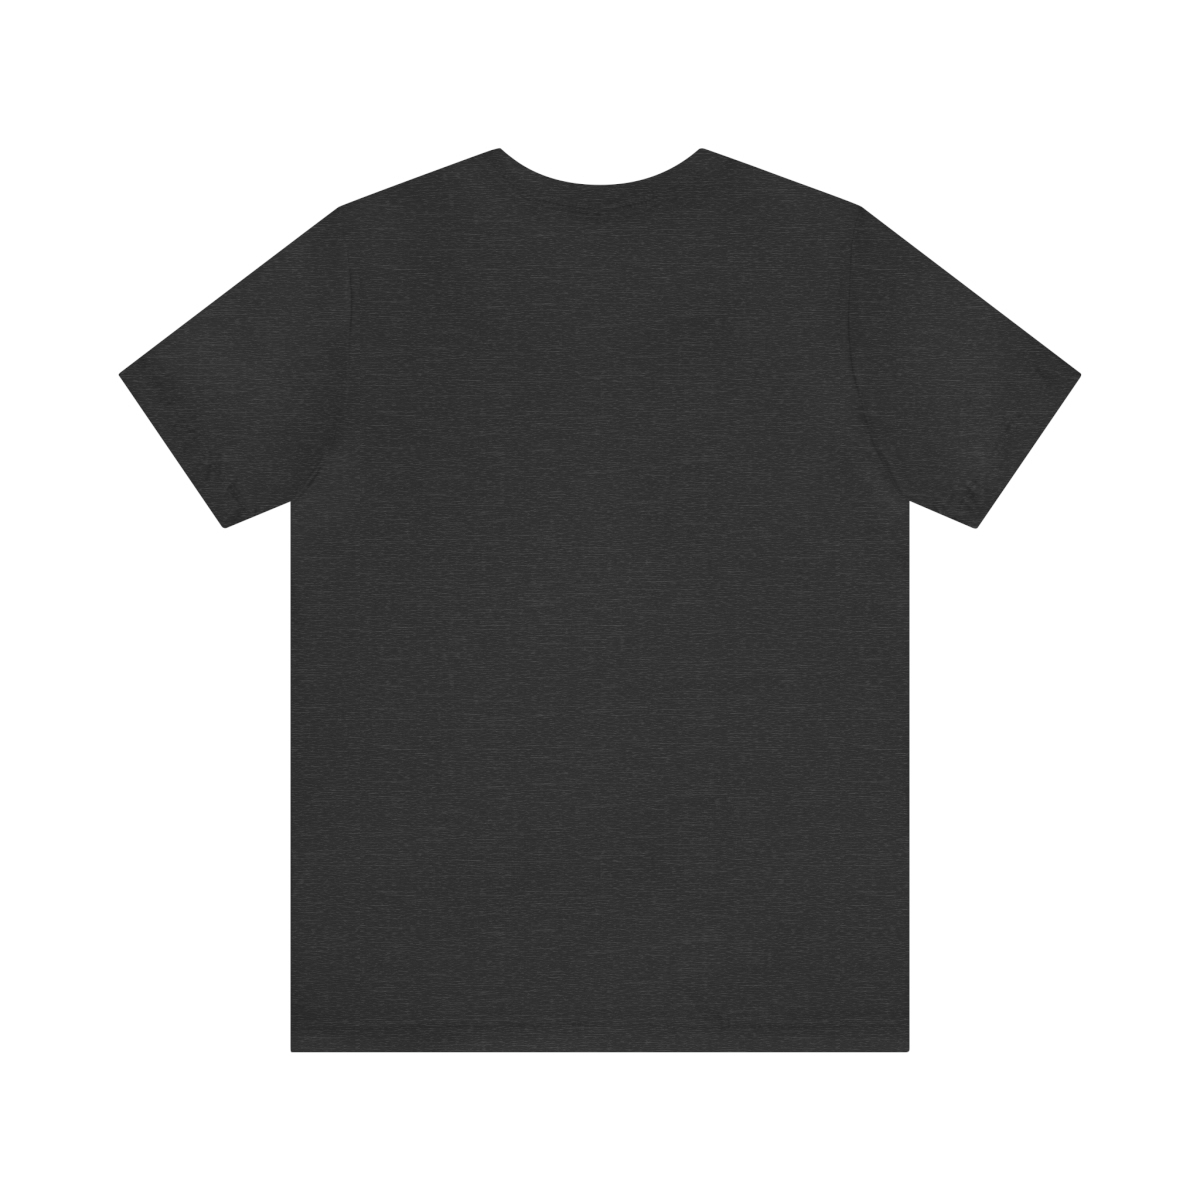 Unisex Jersey Short Sleeve Tee - Getting Chilly